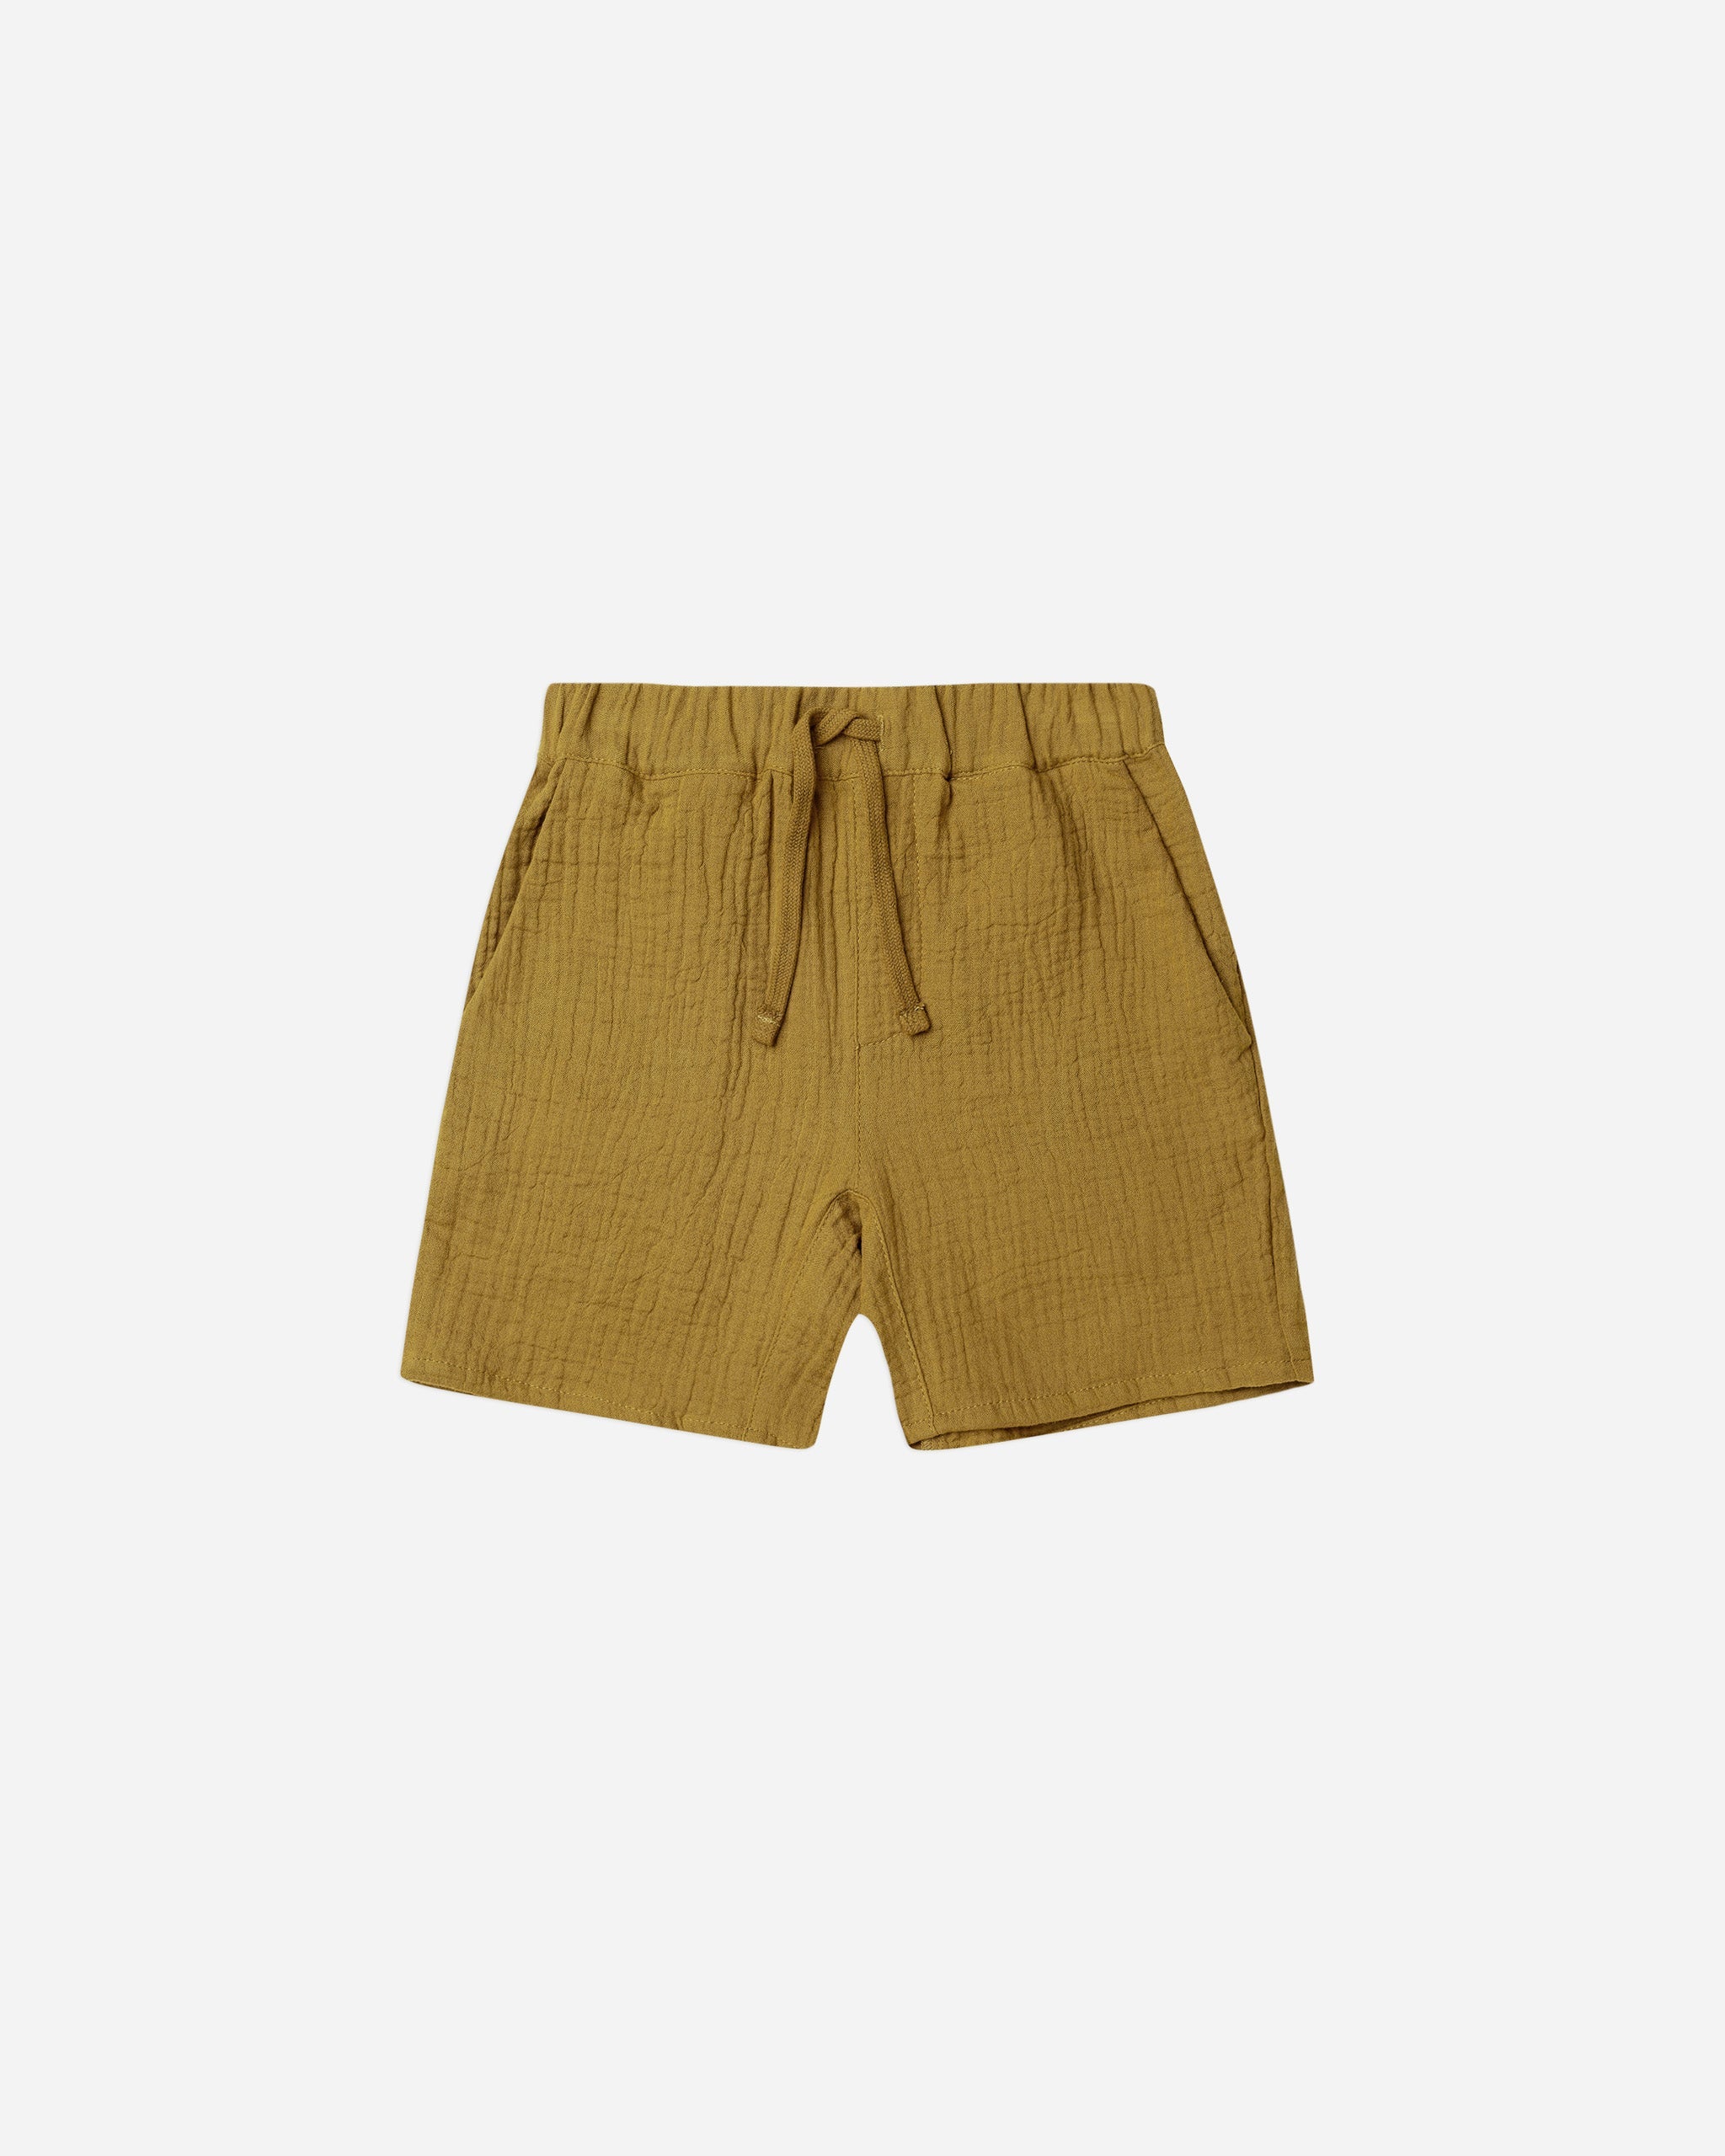 bermuda short || ochre - Rylee + Cru | Kids Clothes | Trendy Baby Clothes | Modern Infant Outfits |